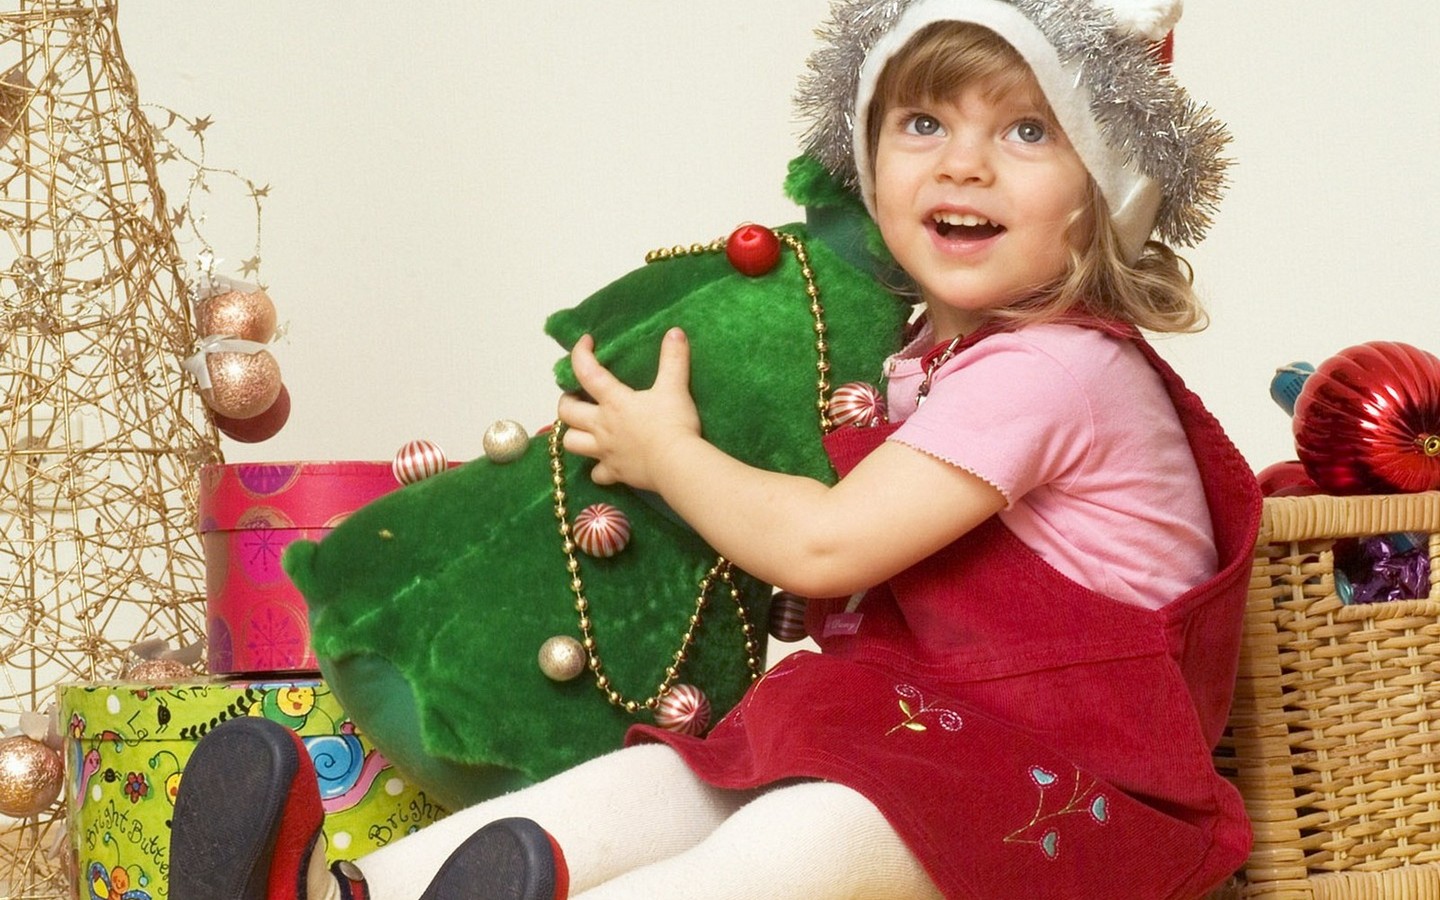 A_cute_kids_in_Gifts_during_christmas_times